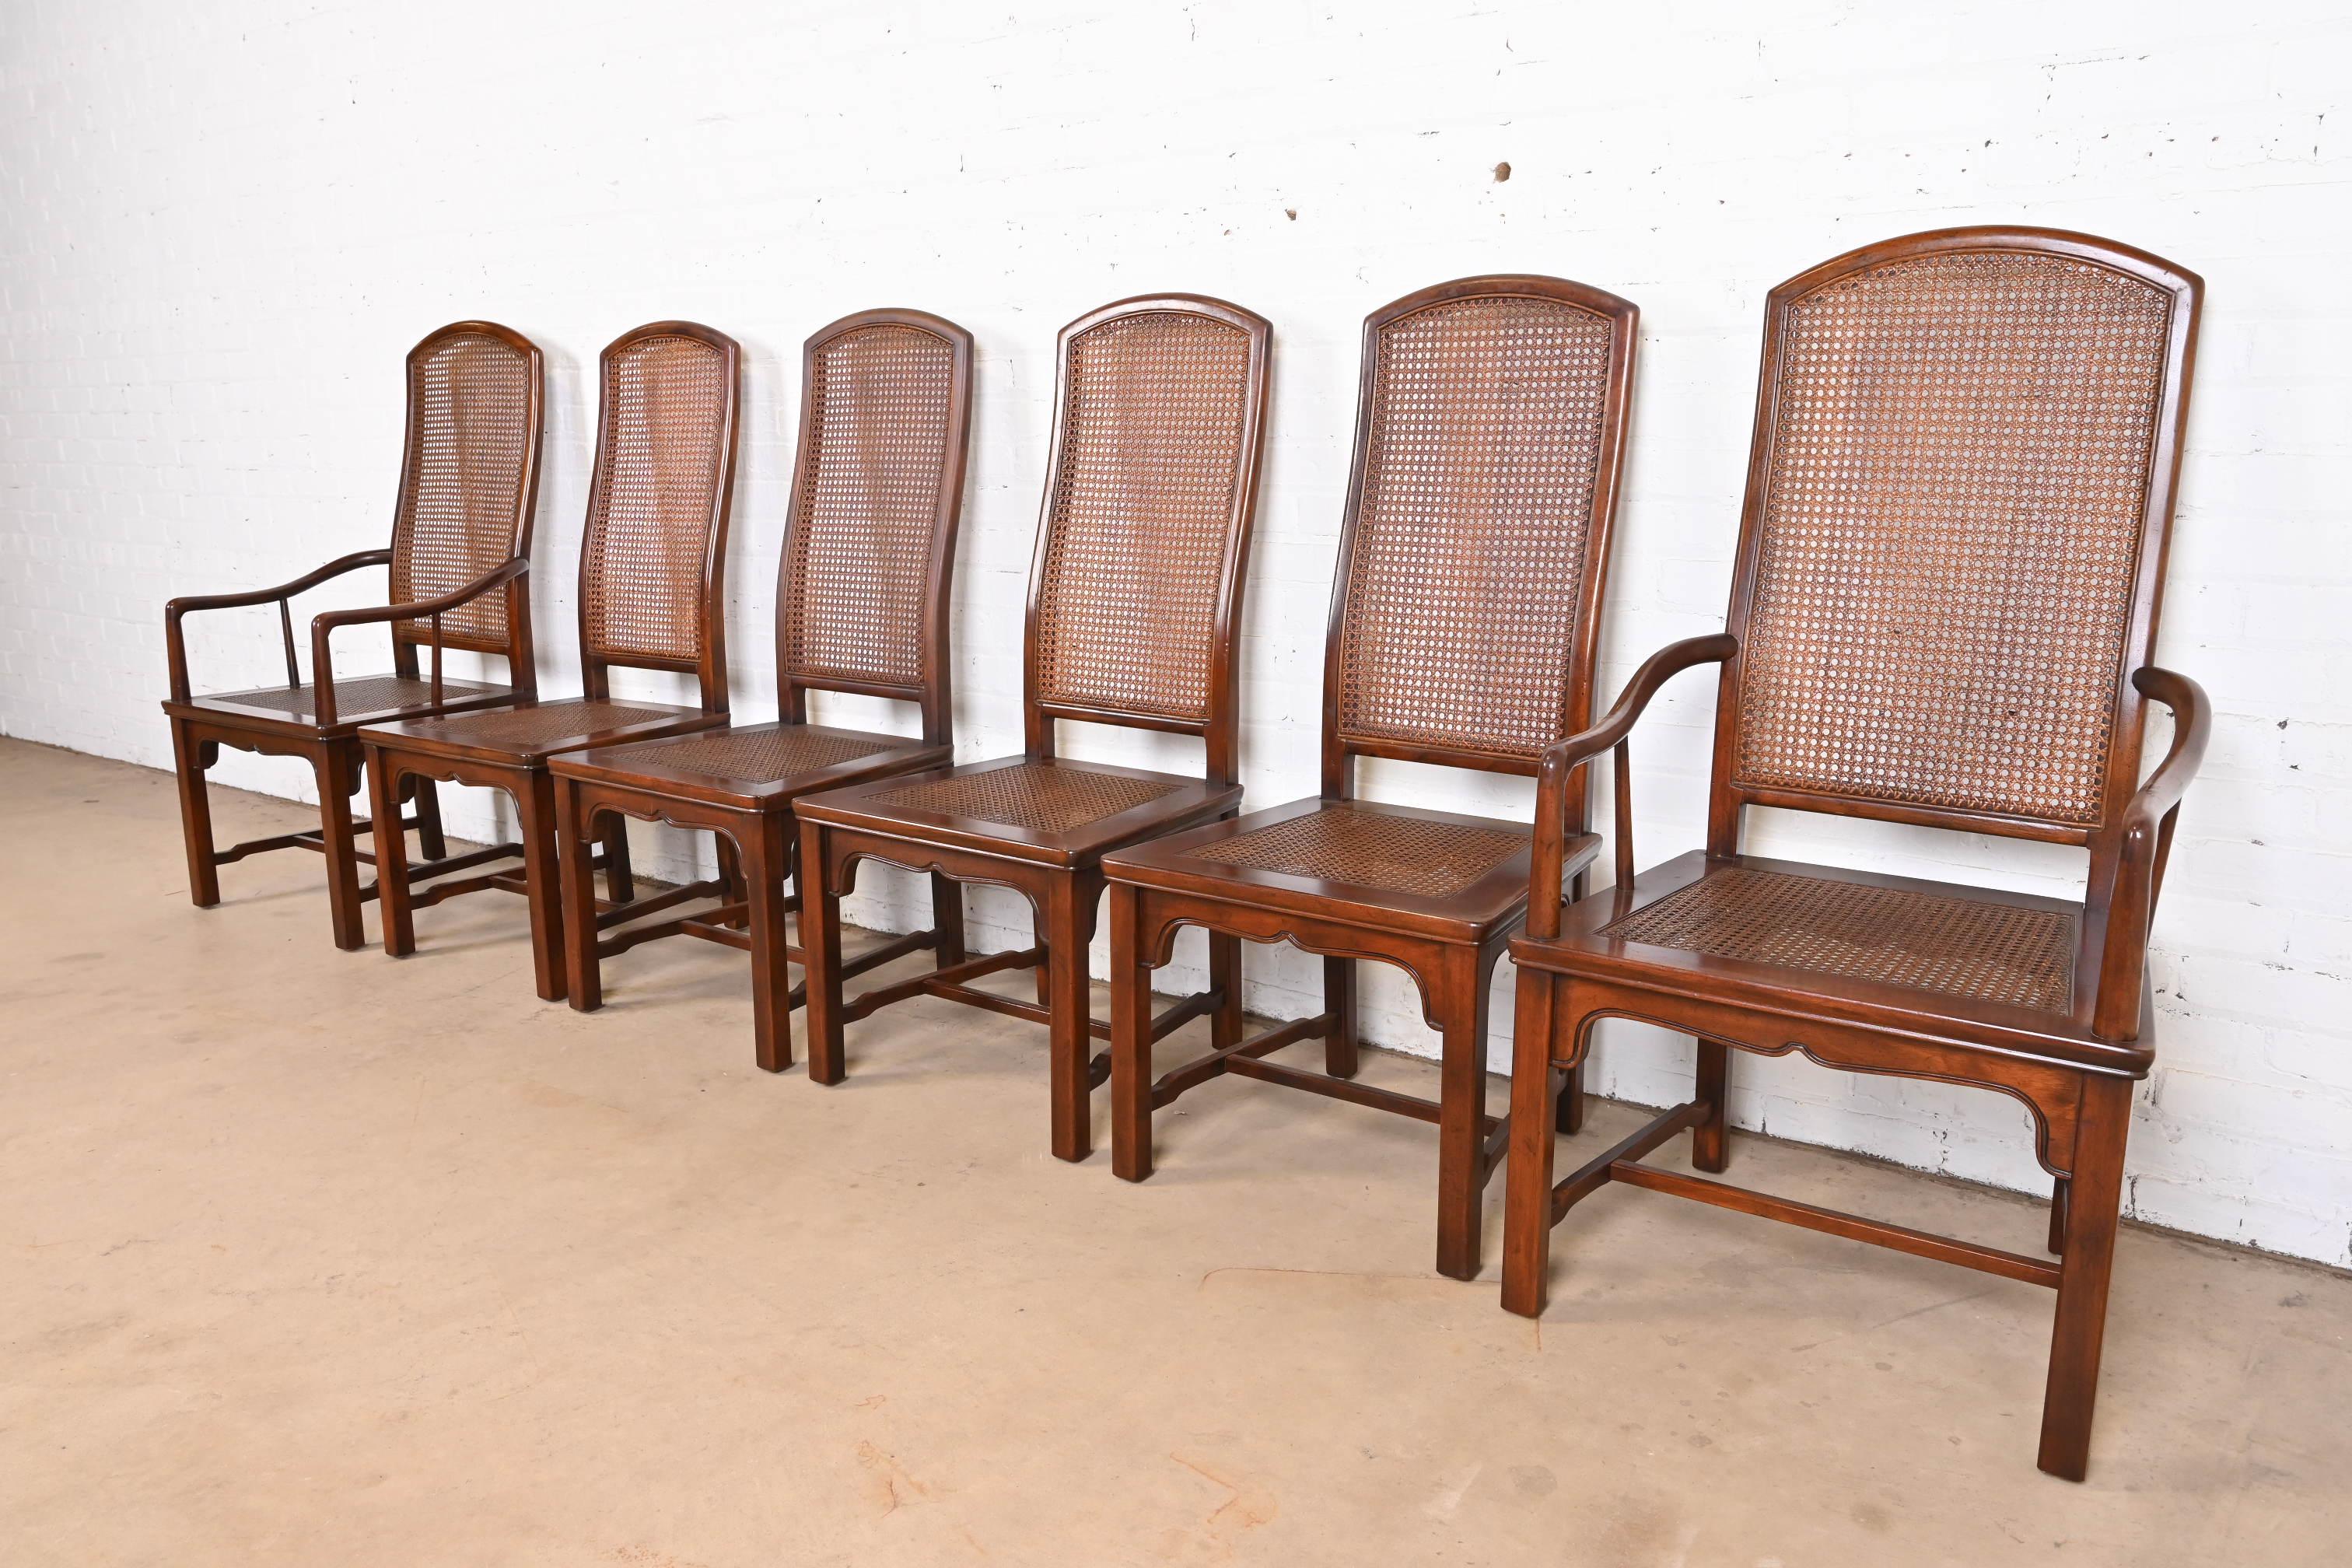 Henredon Hollywood Regency Chinoiserie Sculpted Mahogany Dining Chairs, Set of 6 For Sale 4